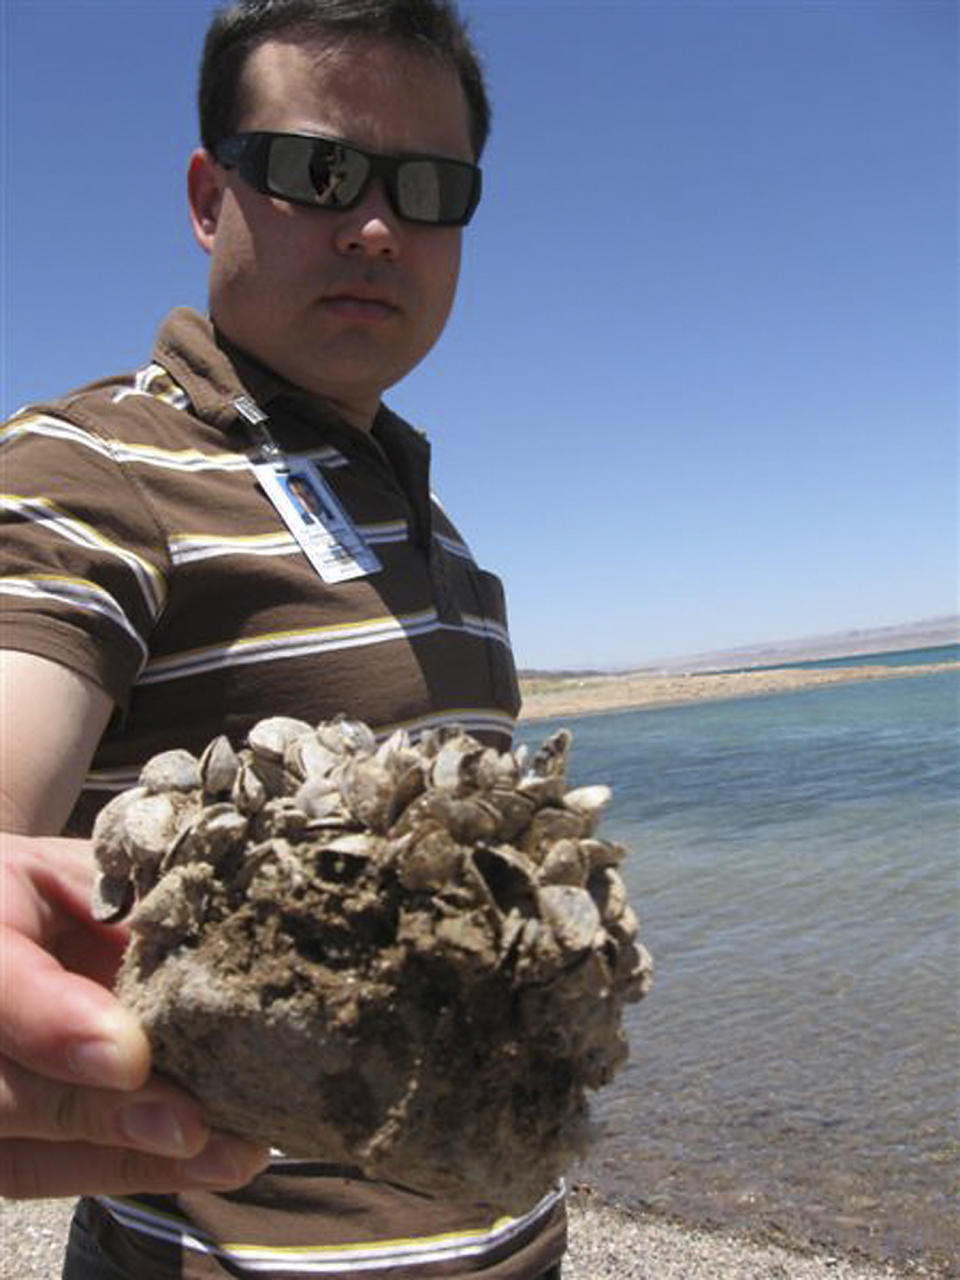 File - In this July 6, 2009 file photo, Andrew Munoz, of the Lake Mead National Recreation Area, holds up a rock covered with the invasive quagga mussels at Lake Mead National Recreation Area, Nev. A regional power planning group from Idaho, Oregon, Washington and Montana is pursuing $2 million from the federal government to help fend off the menace of invasive mussels that have clogged Colorado River reservoirs since 2007. These states and others say they're frustrated by the number of boats that continue to come from Lake Mead in Nevada and Arizona over their borders infested with quagga and zebra mussels. (AP Photo/Felicia Fonseca, File)